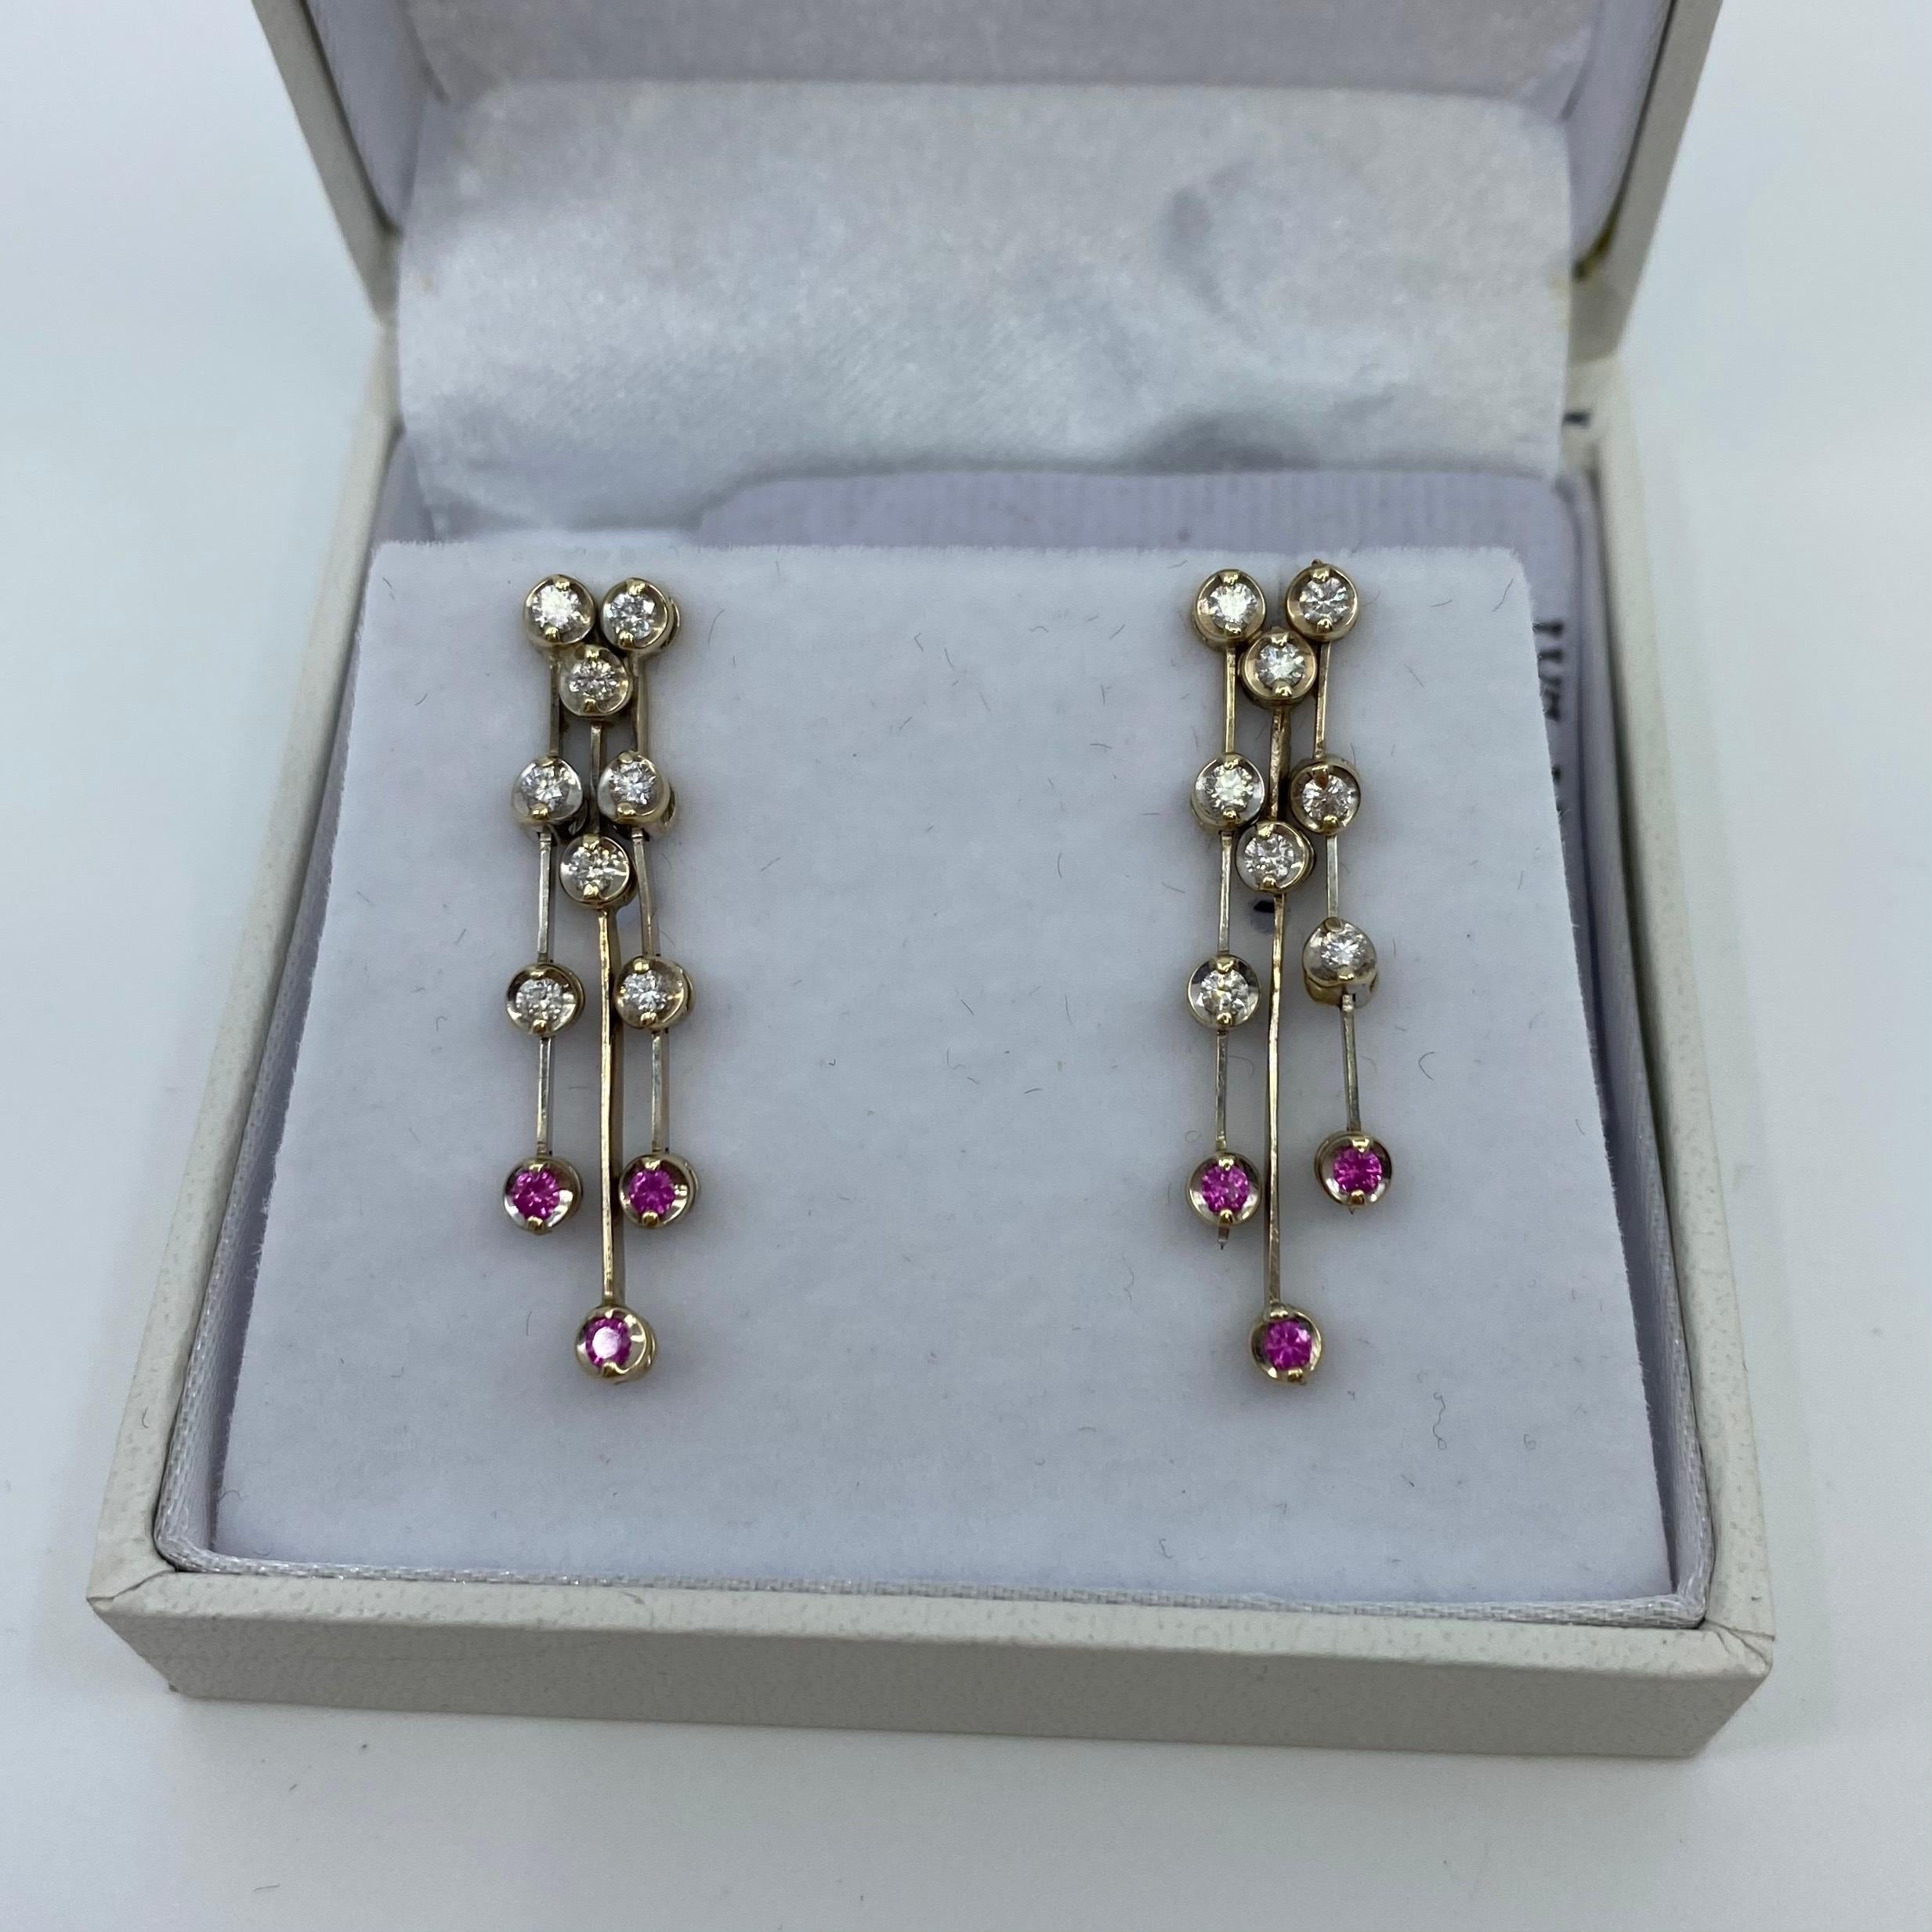 Ruby & Diamond 18 Karat White Gold Dangle Waterfall Earring Studs.

Beautifully made, with a unique design and excellent quality stones.

Earrings fastened by butterfly backs and post.
Fully hallmarked by UK Assay Office to guarantee metal